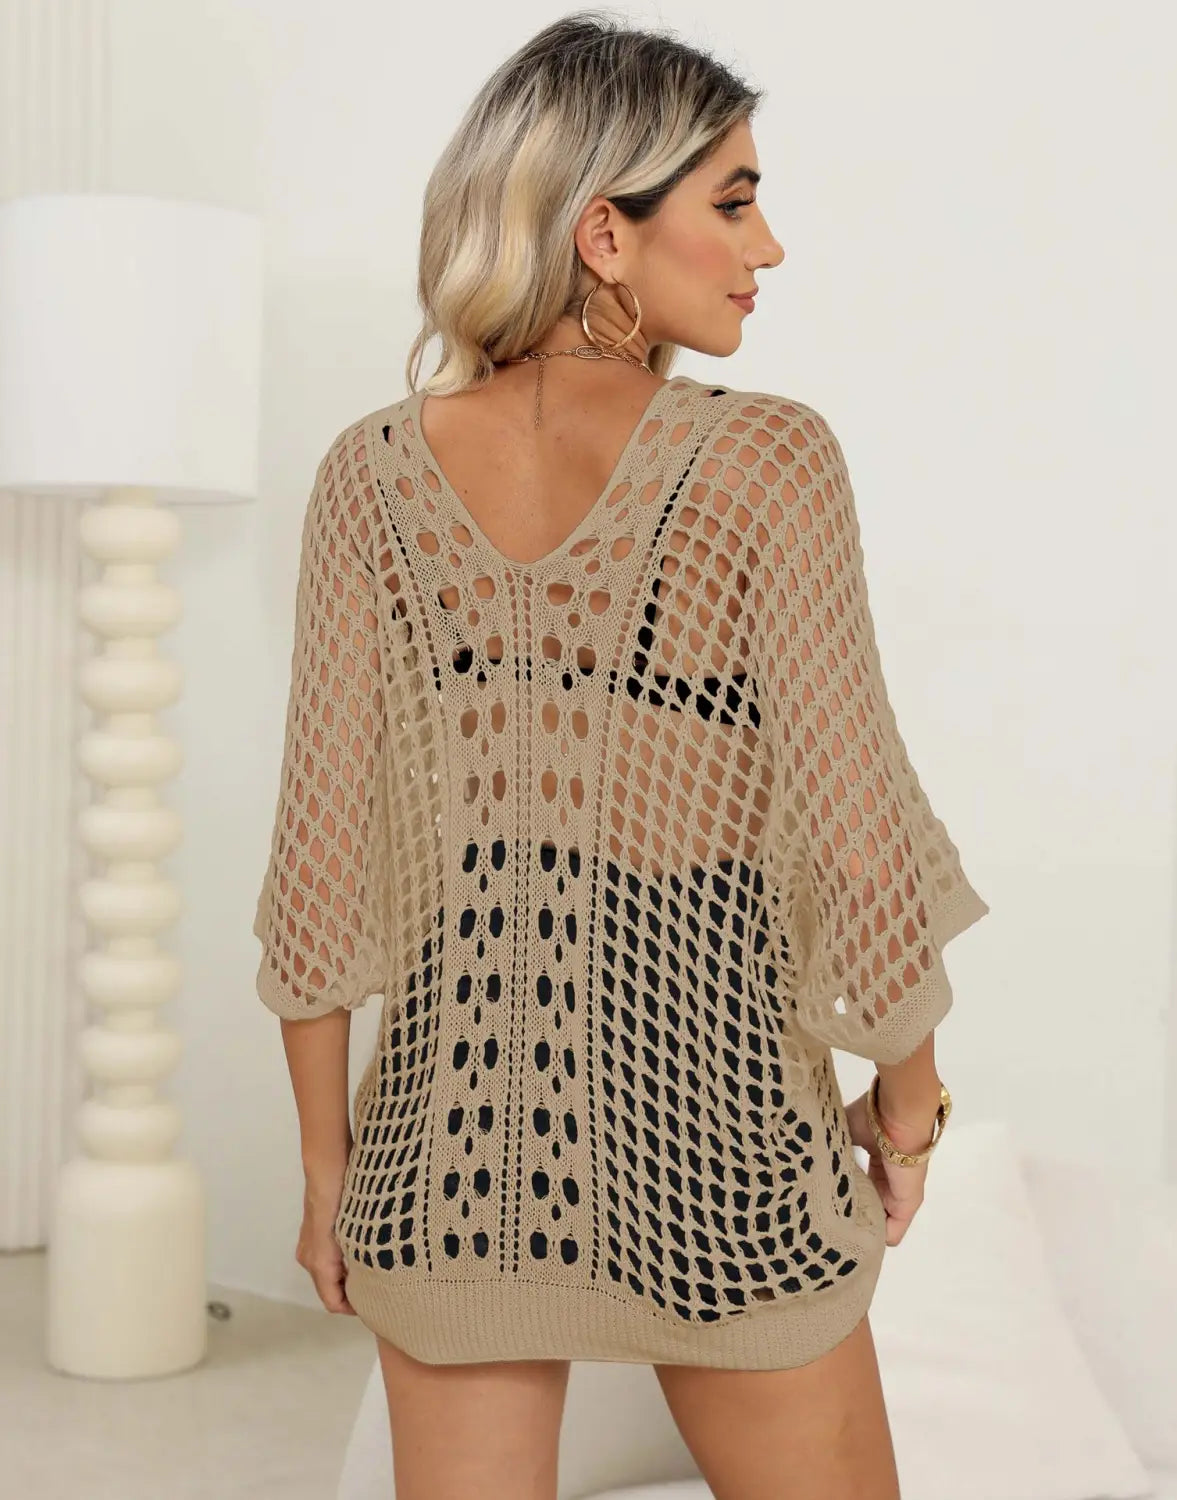 Boho Lace Cover-up Blouse – Effortless Summer Chic